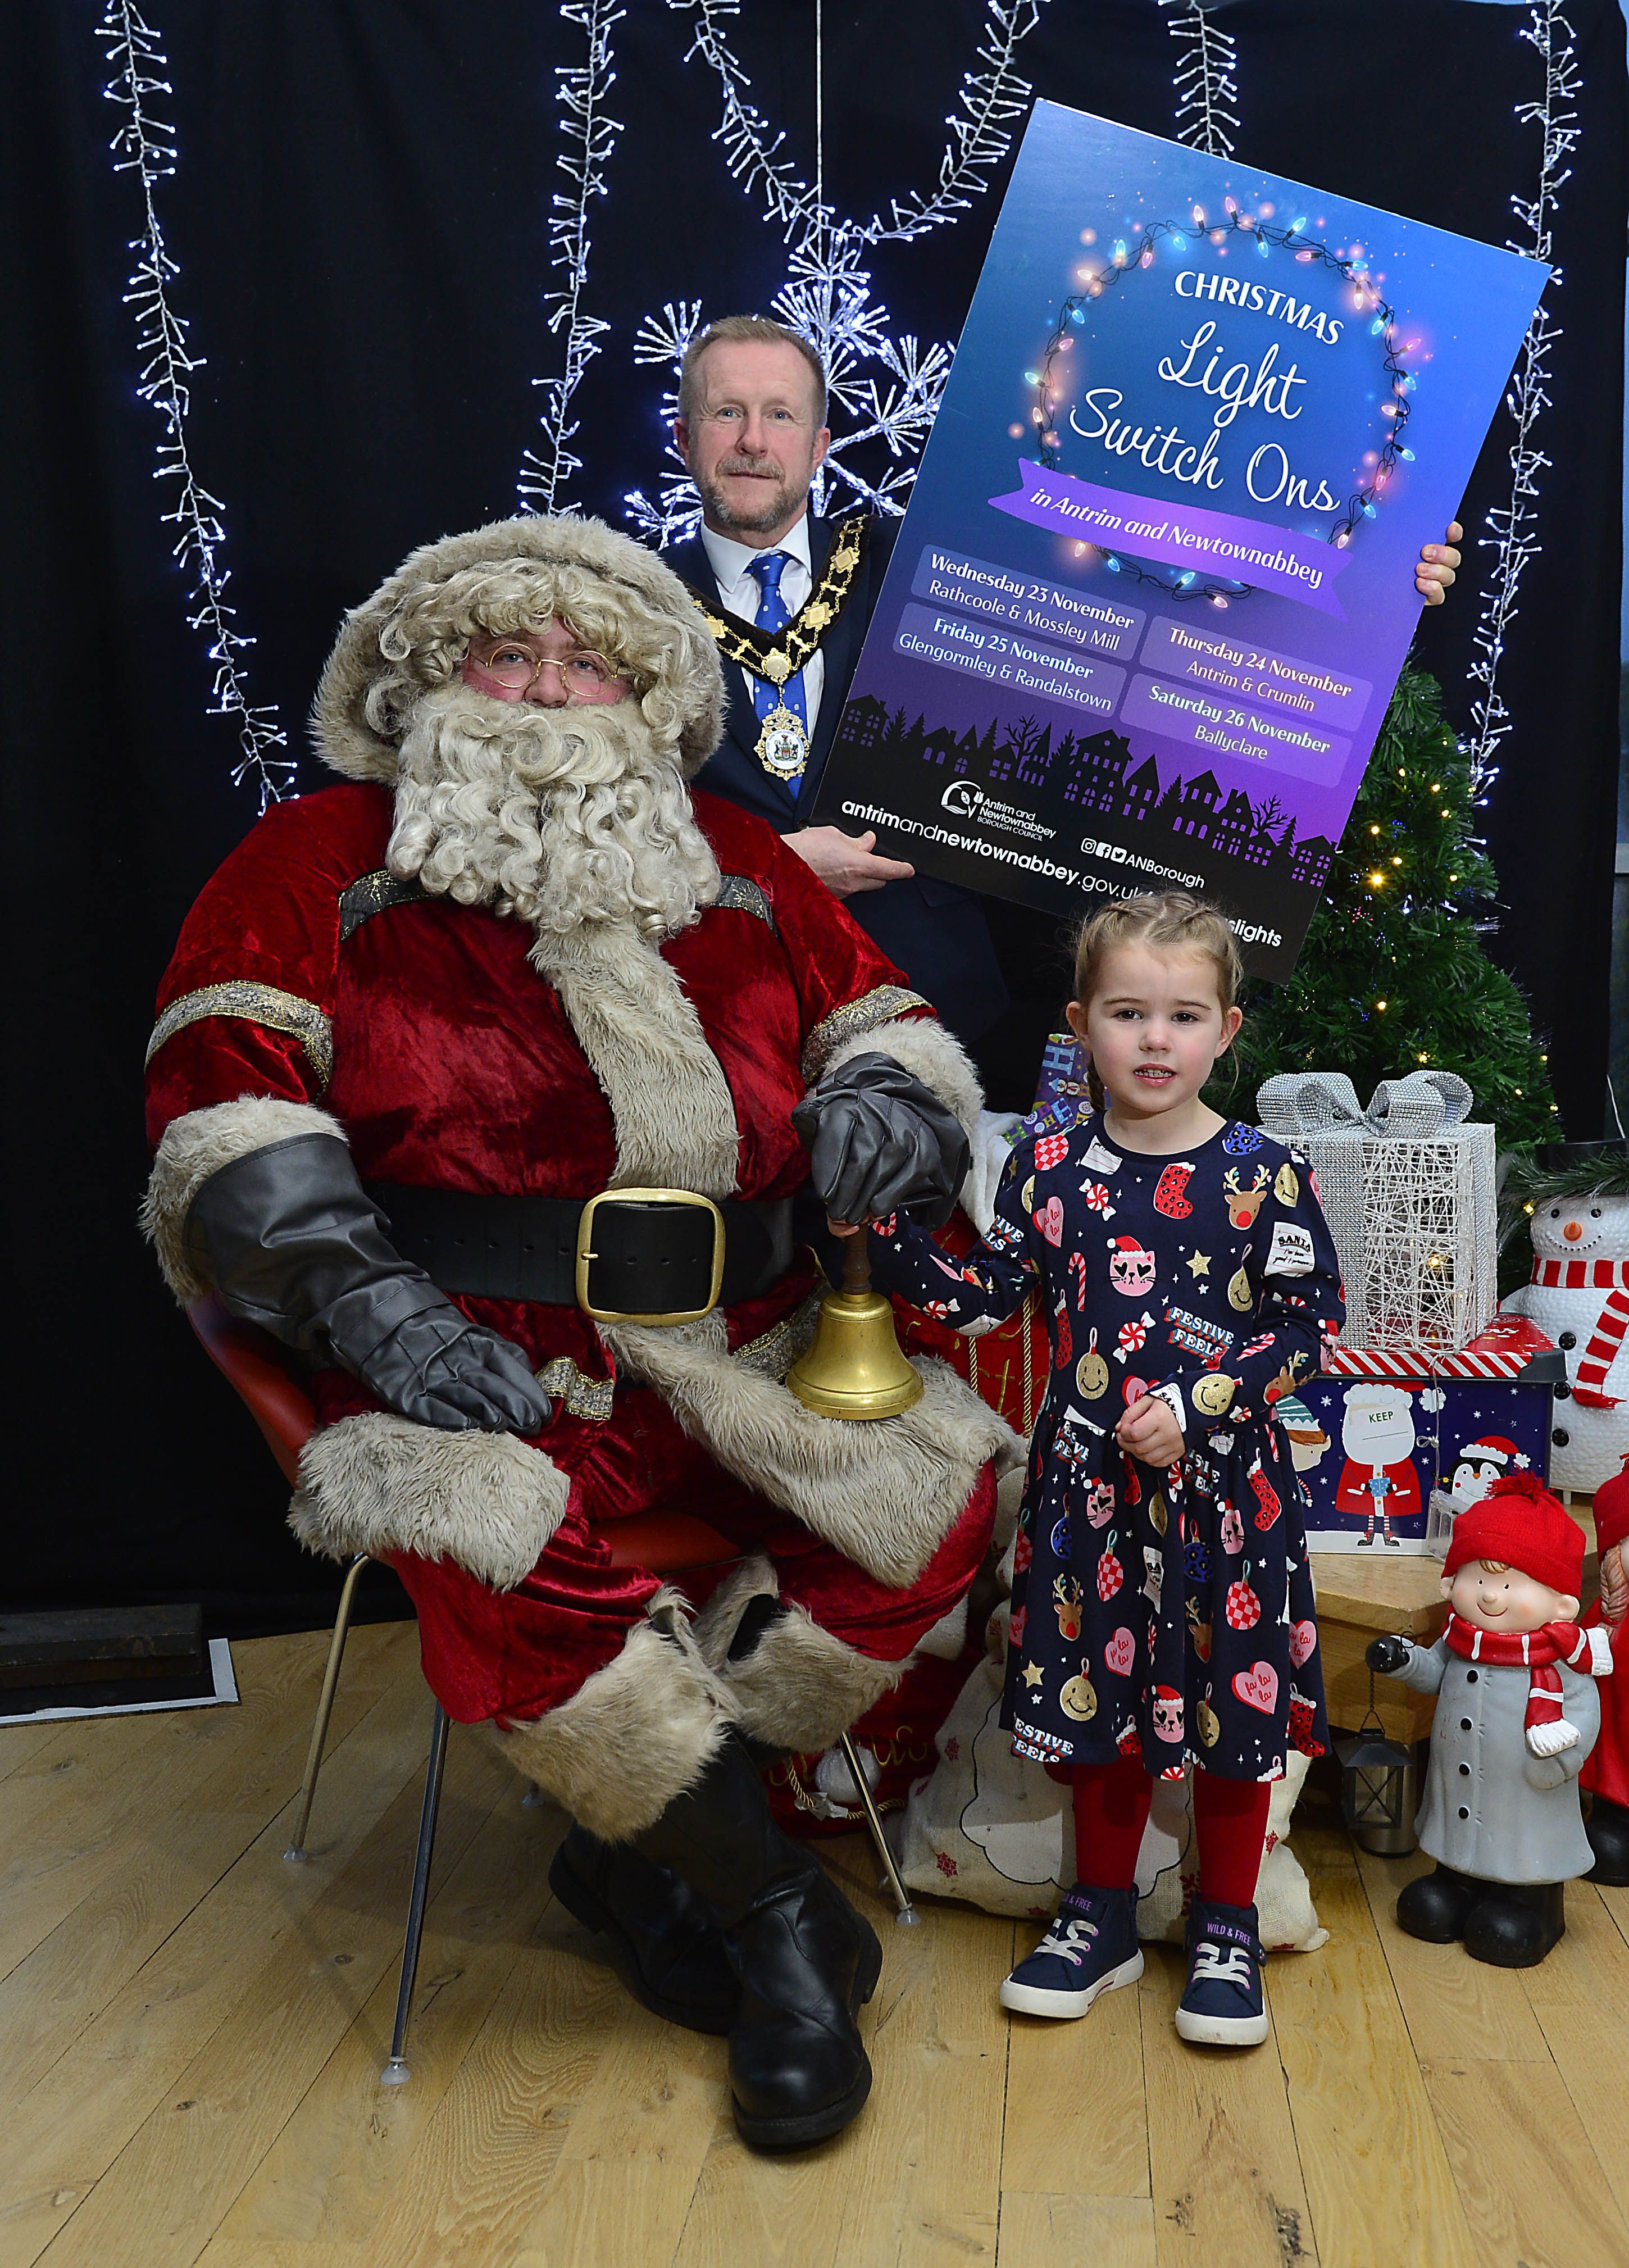 CHRISTMAS READY: Santa Claus joins the Mayor of Antrim and Newtownabbey, Alderman Stephen Ross and little Ruby Norris to launch the Christmas Light Switch Ons.